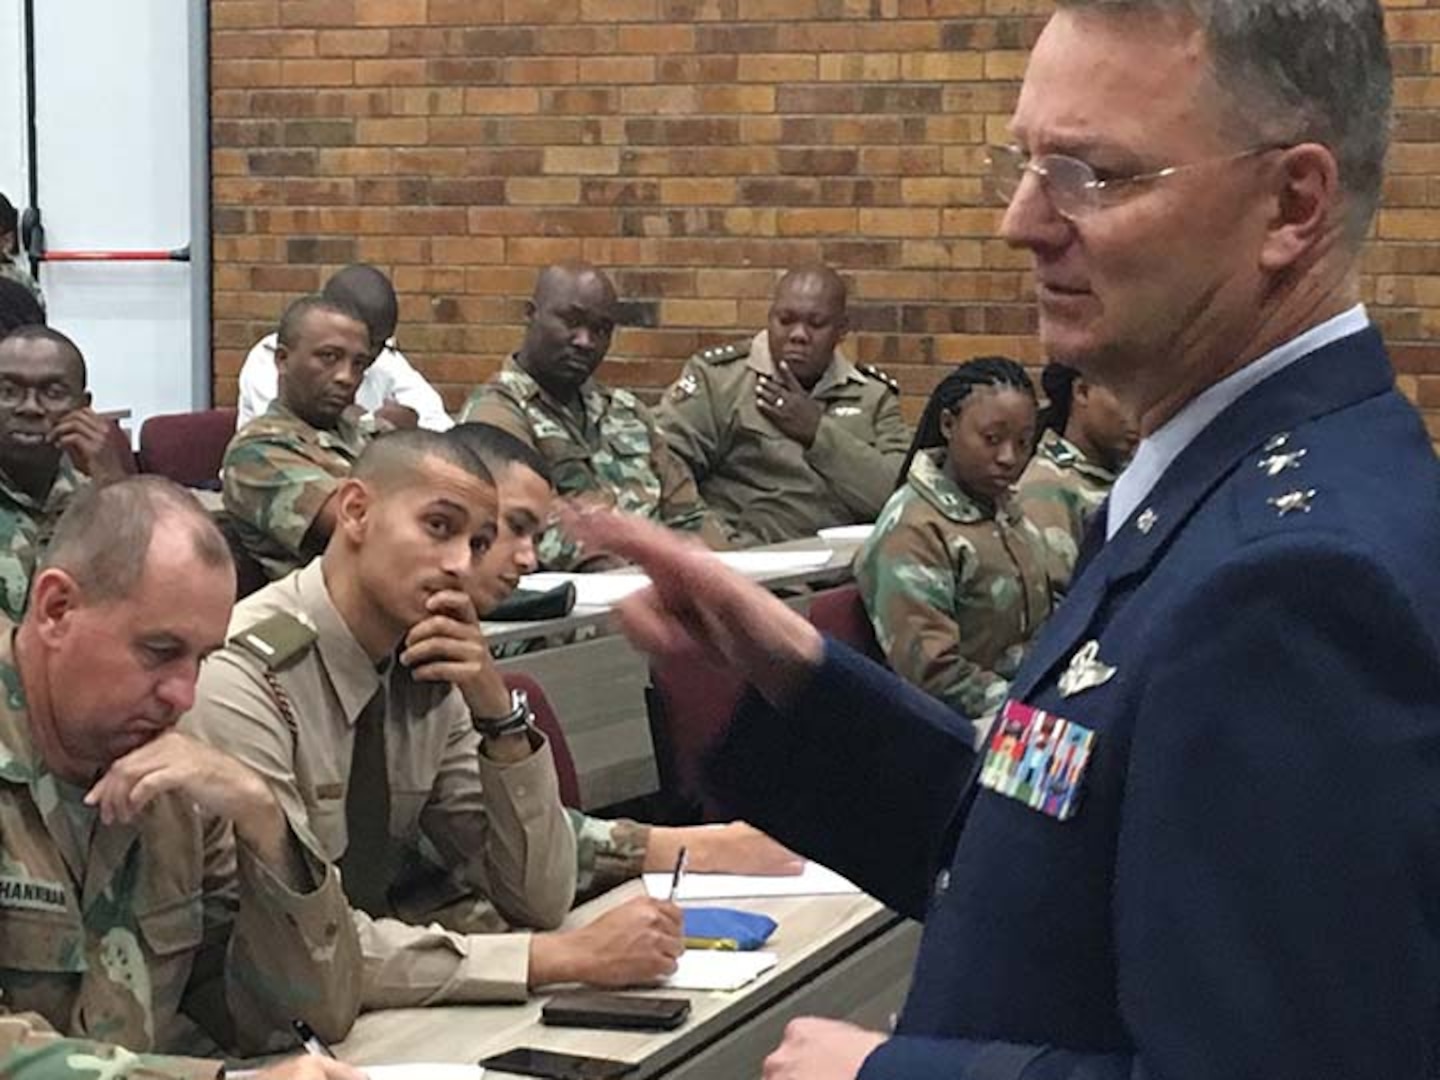 Major General Anthony German, the adjutant general of New York, meets with cadets at the Military Academy of South Africa in Saldanha,  Western Cape Province, South Africa on May 8, 2018. German was speaking at the Academy as part of an exchange program executed as part of the New York National Guard State Partnership Program relationship with the South African National Defense Force.